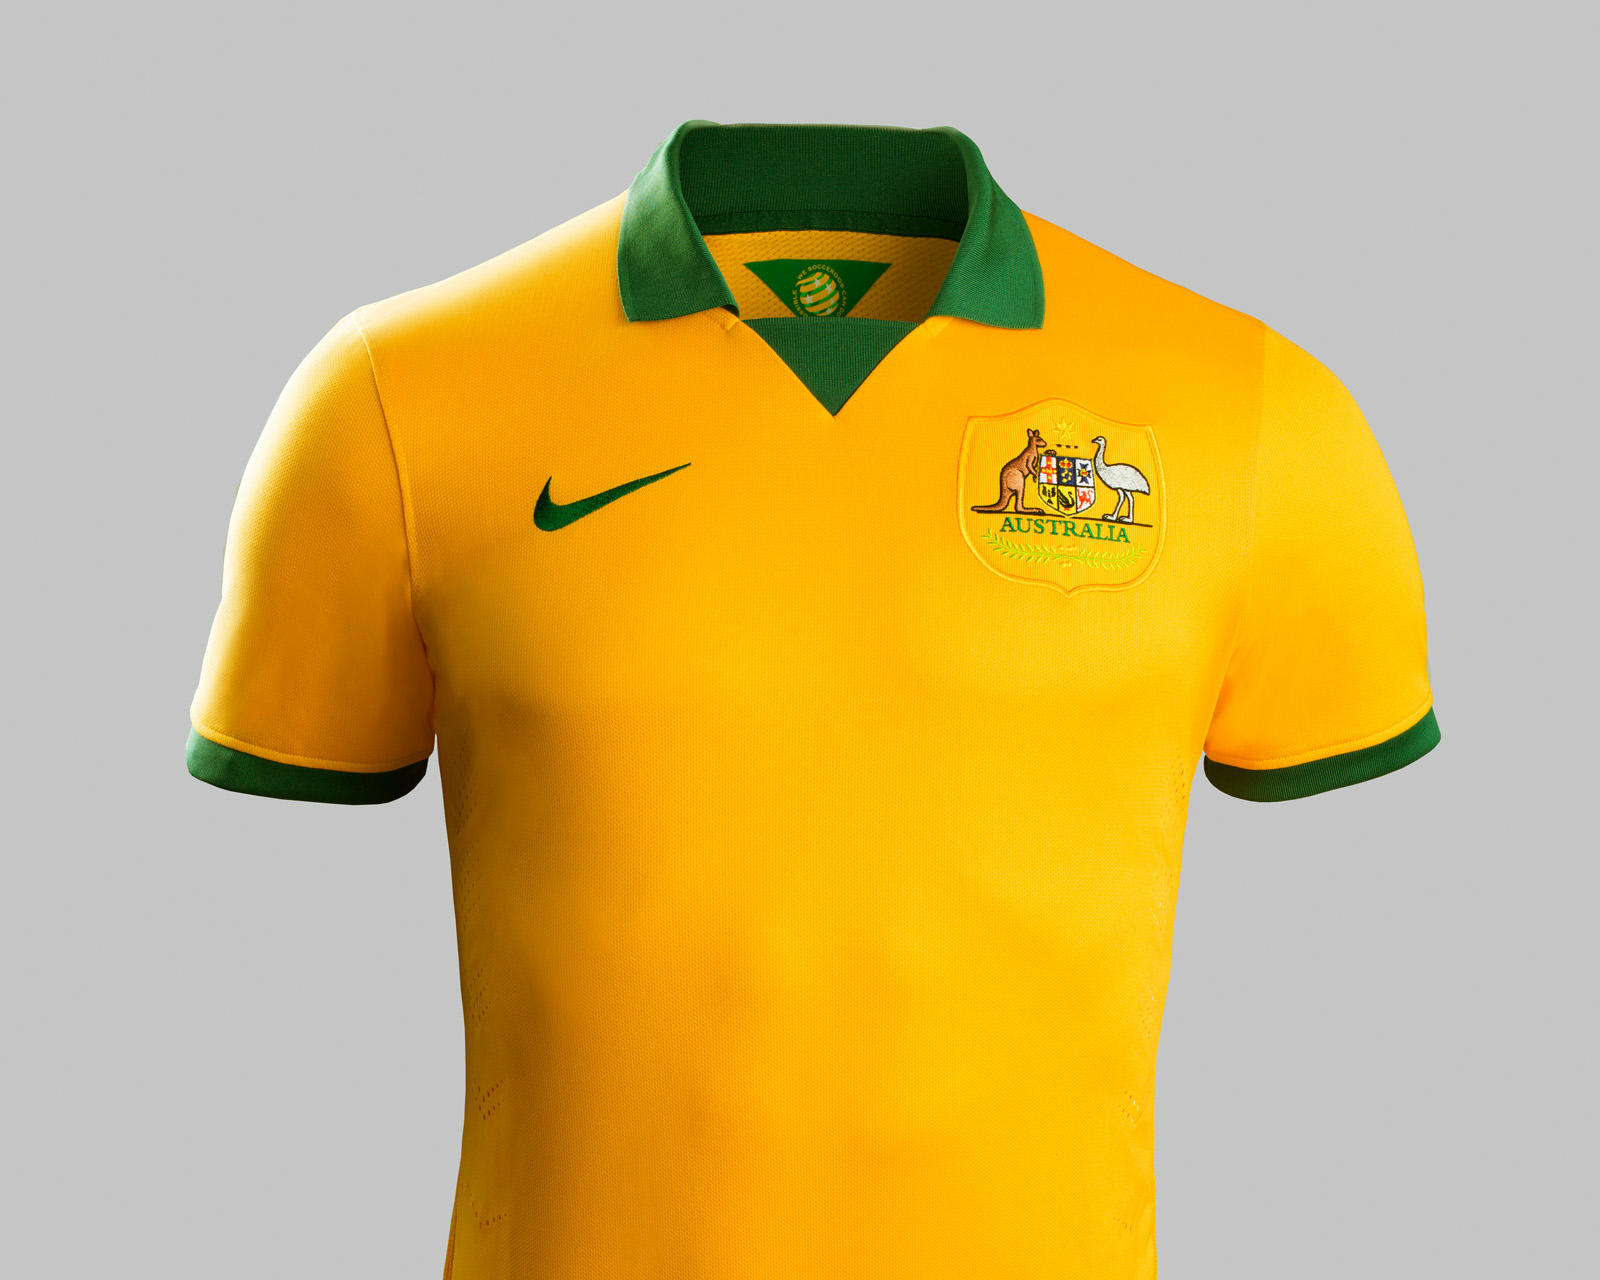 Australia 2014 World Cup Home and Away Kits Released - Footy Headlines